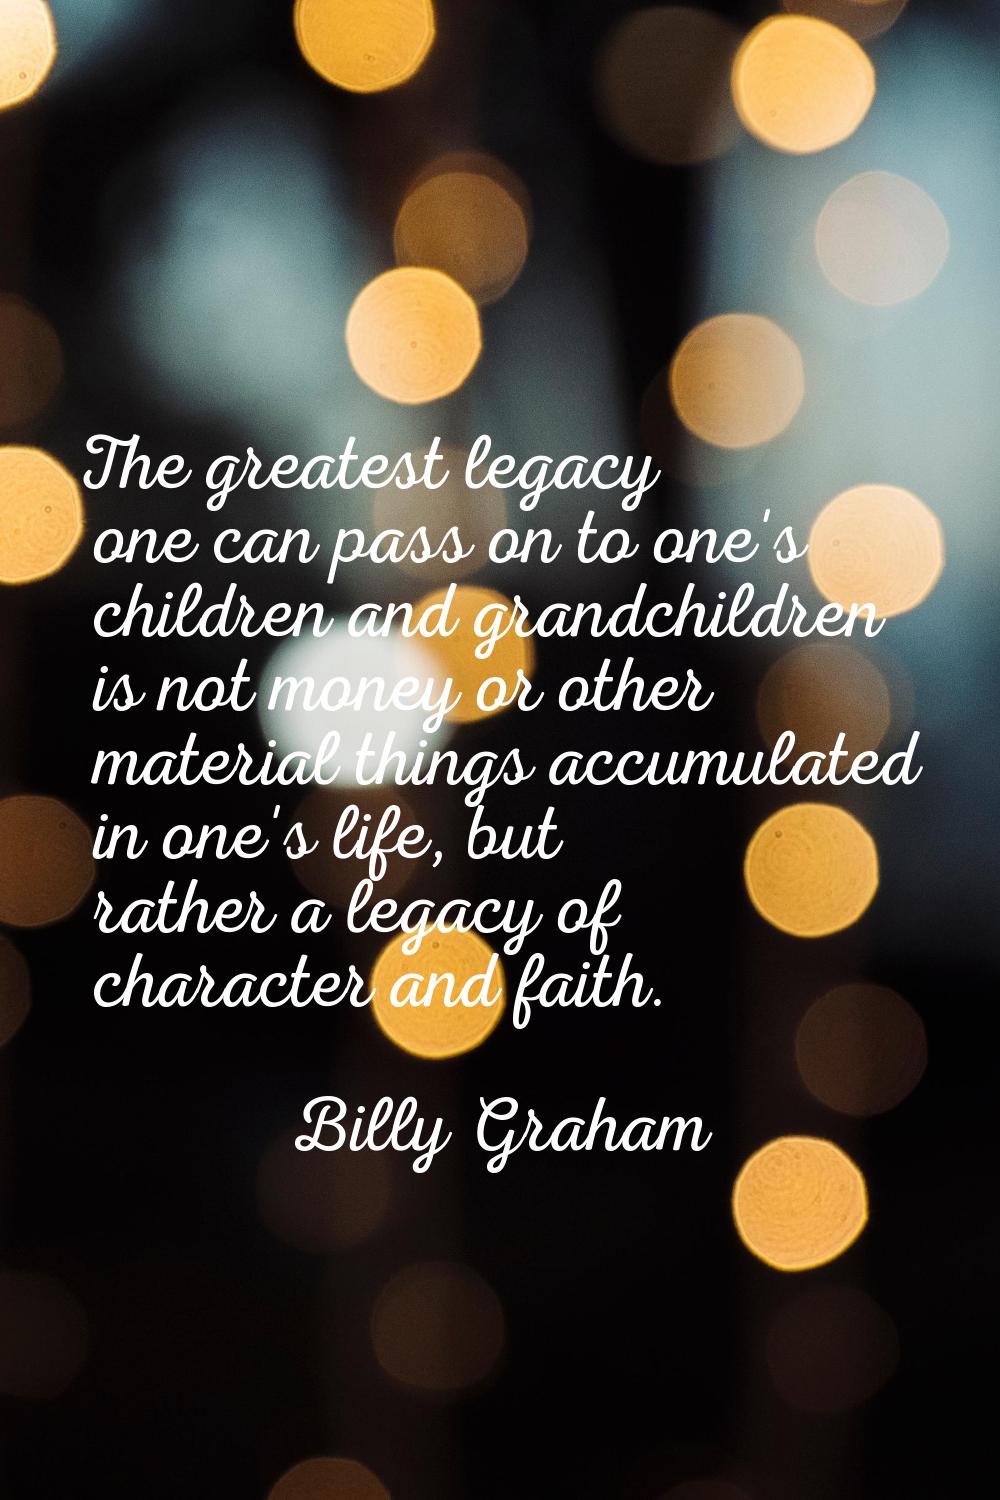 The greatest legacy one can pass on to one's children and grandchildren is not money or other mater